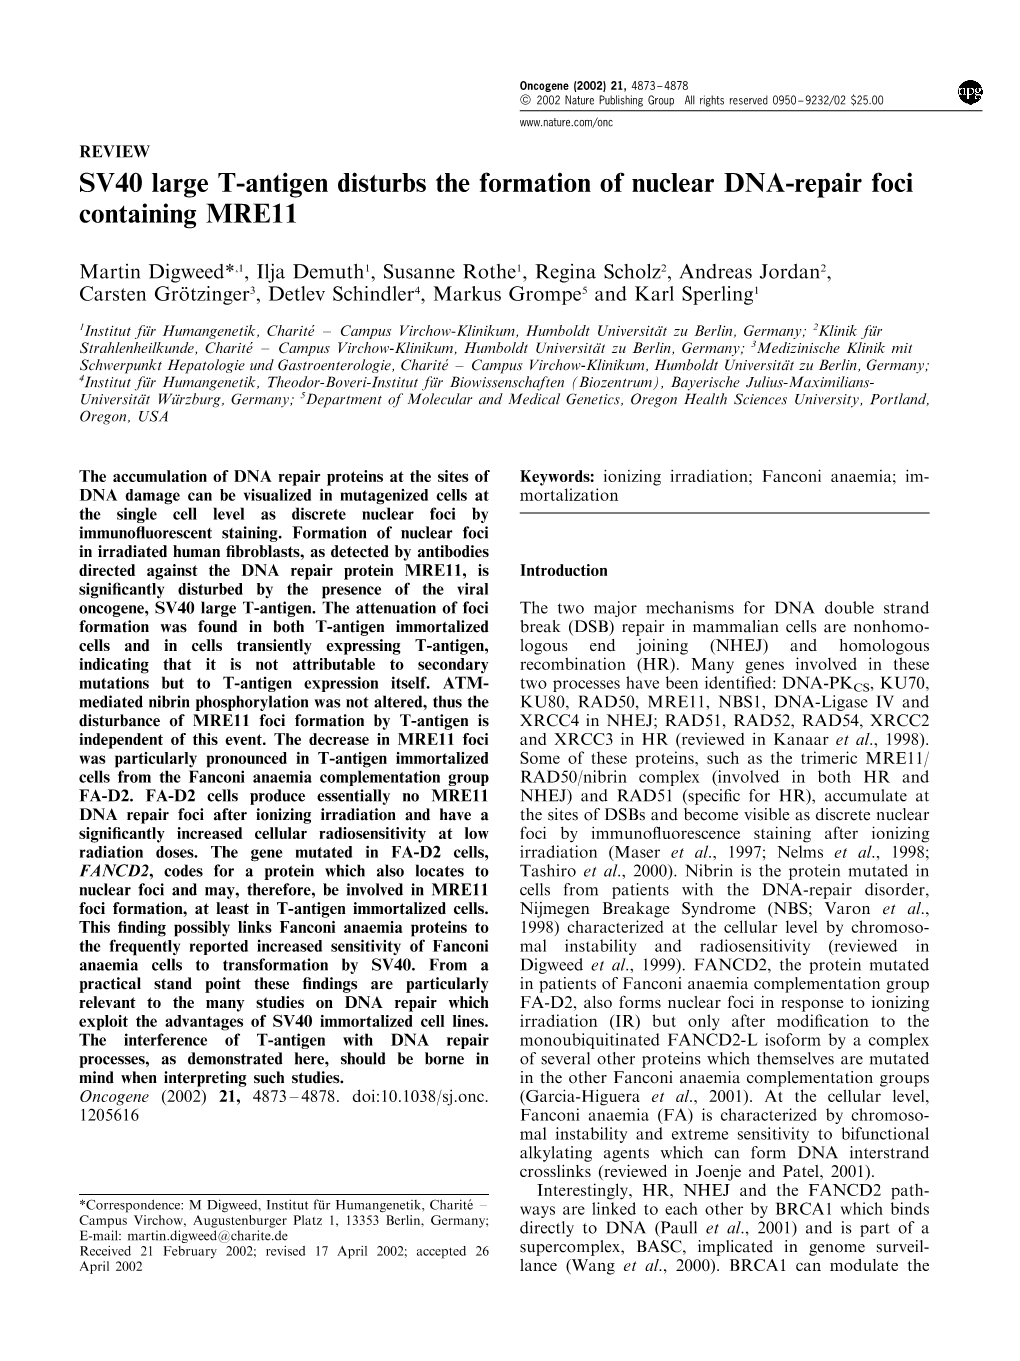 SV40 Large T-Antigen Disturbs the Formation of Nuclear DNA-Repair Foci Containing MRE11